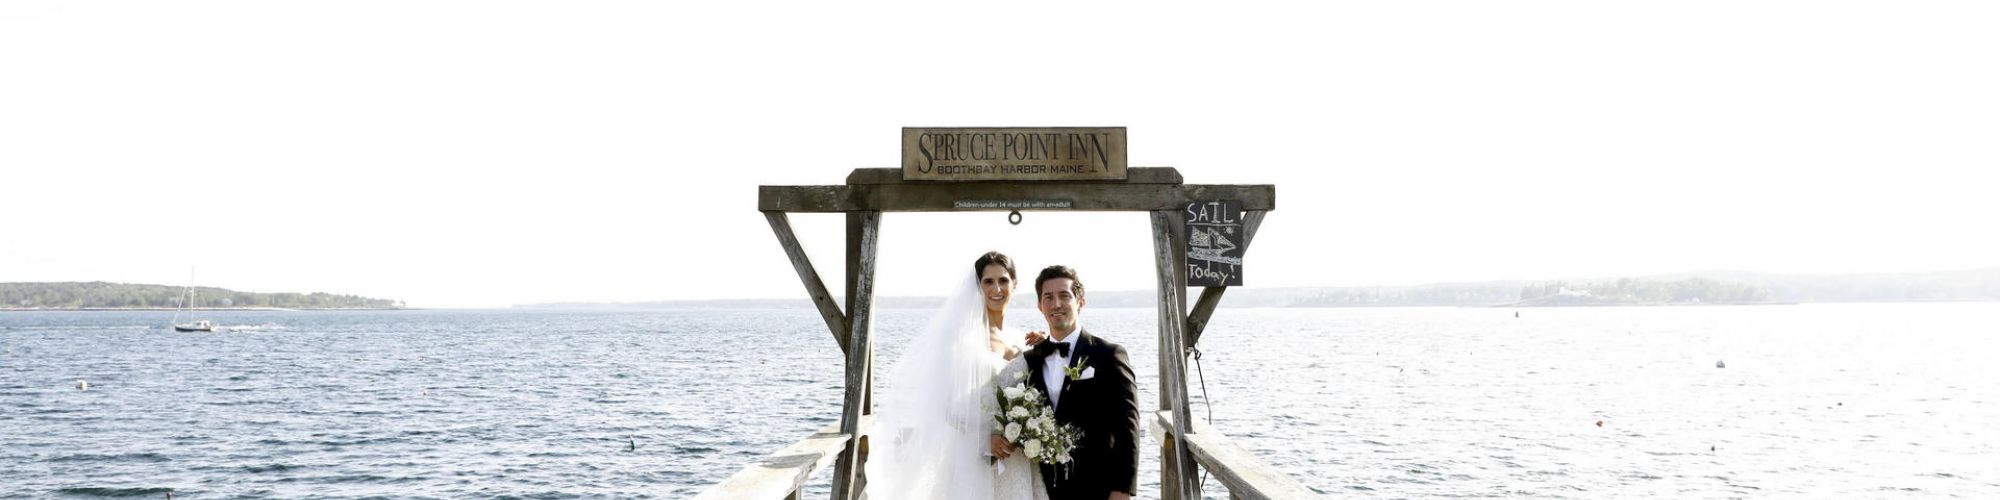 A bride and groom standing on a dock by a large body of water, with a few kayaks visible in the background, under a wooden structure.